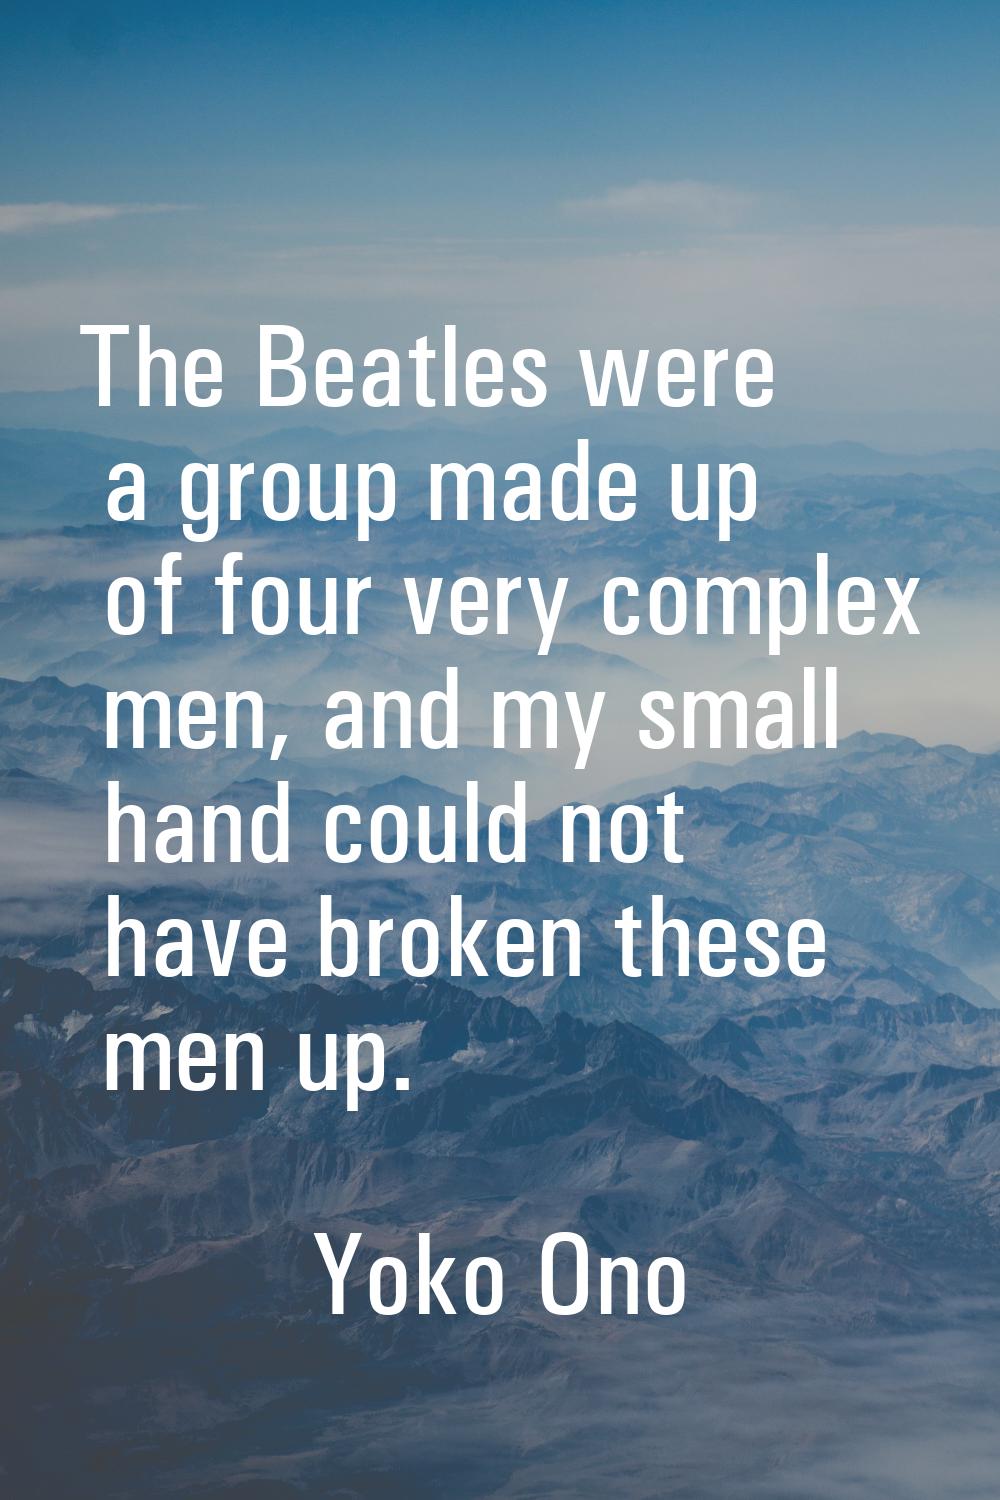 The Beatles were a group made up of four very complex men, and my small hand could not have broken 